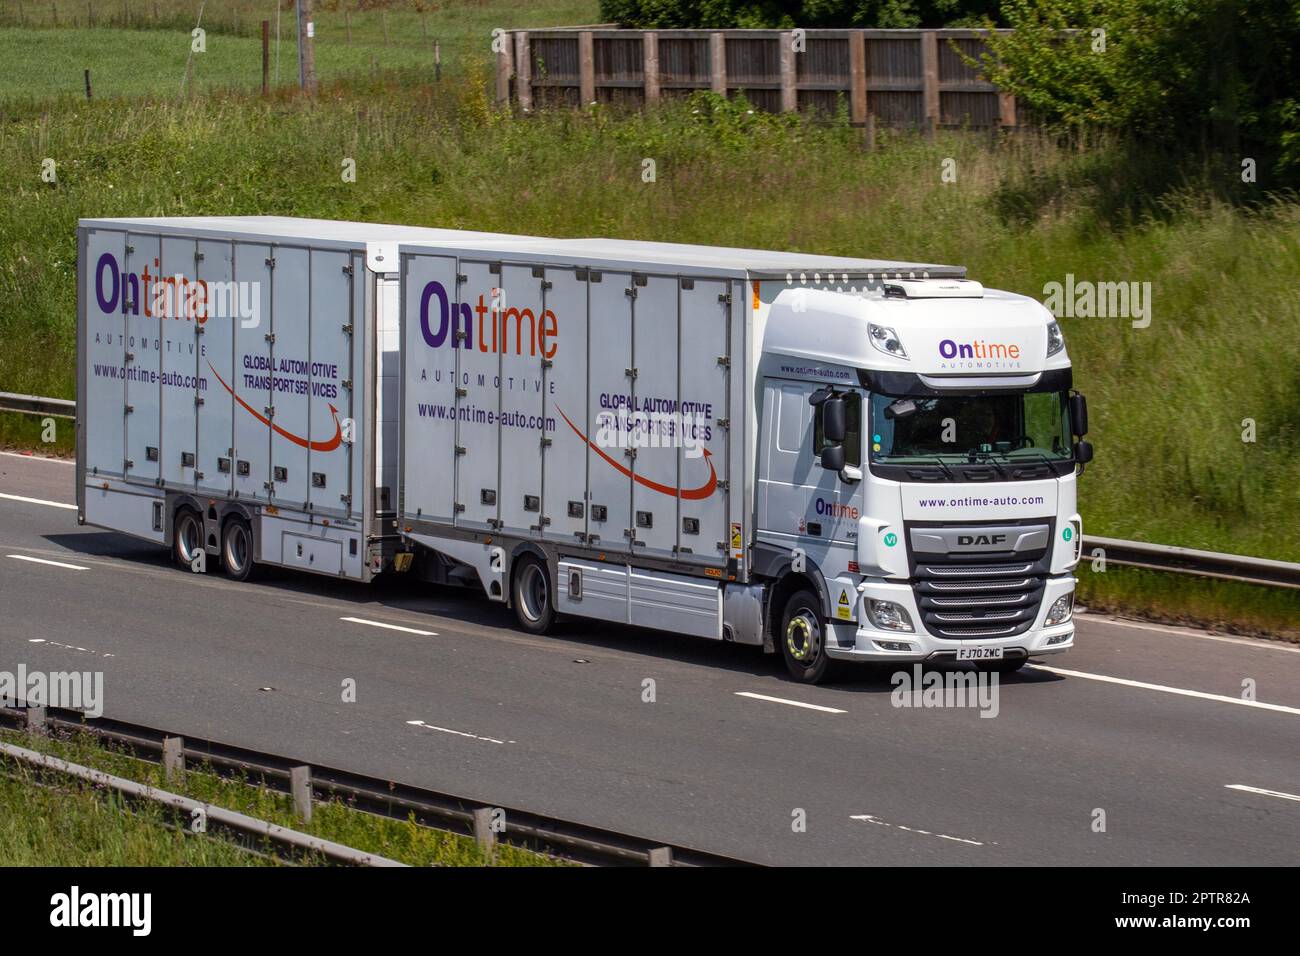 OnTime Automotive, specialist in vehicle transport services, enclosed car delivery operator DAF HGV with trailer; travelling on the M61 motorway, UK Stock Photo